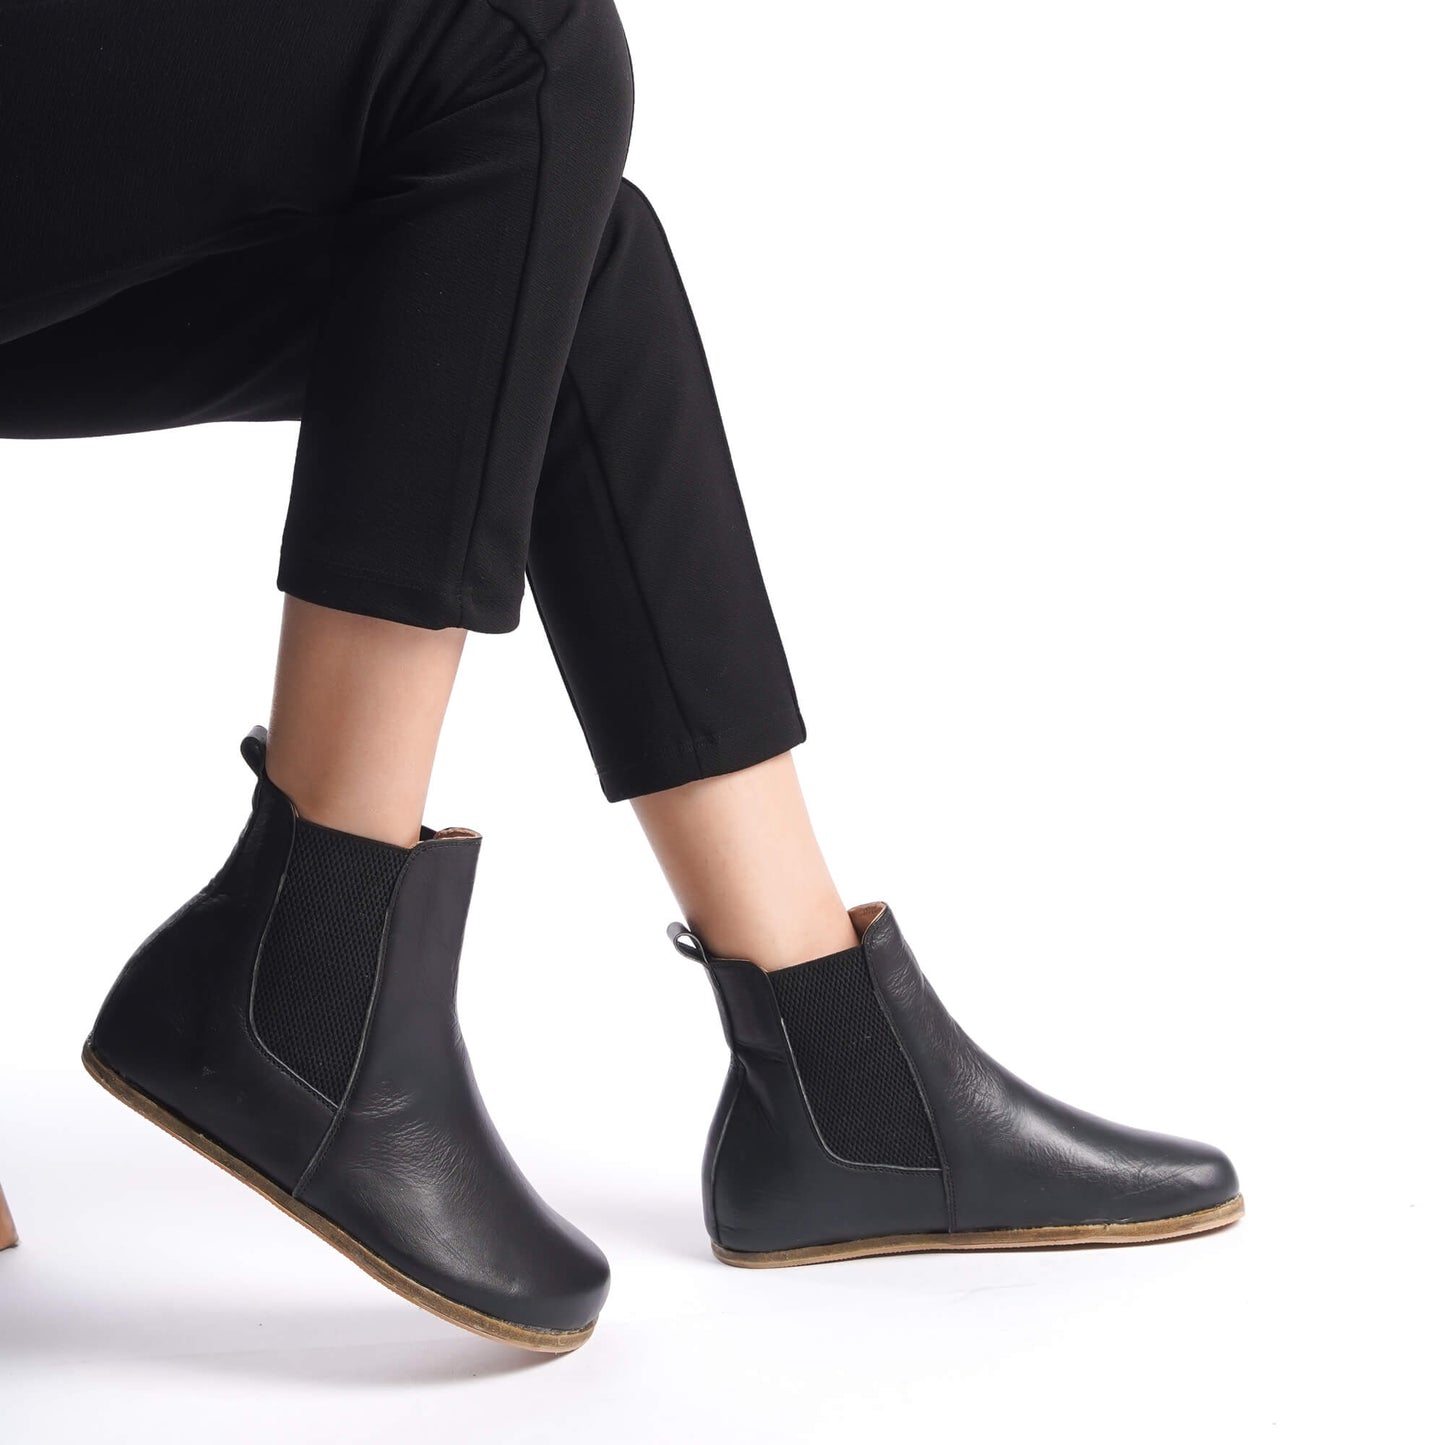 Stylish black Chelsea boots featuring a wide toe box and made from genuine natural leather. Perfect for a chic and comfortable look.